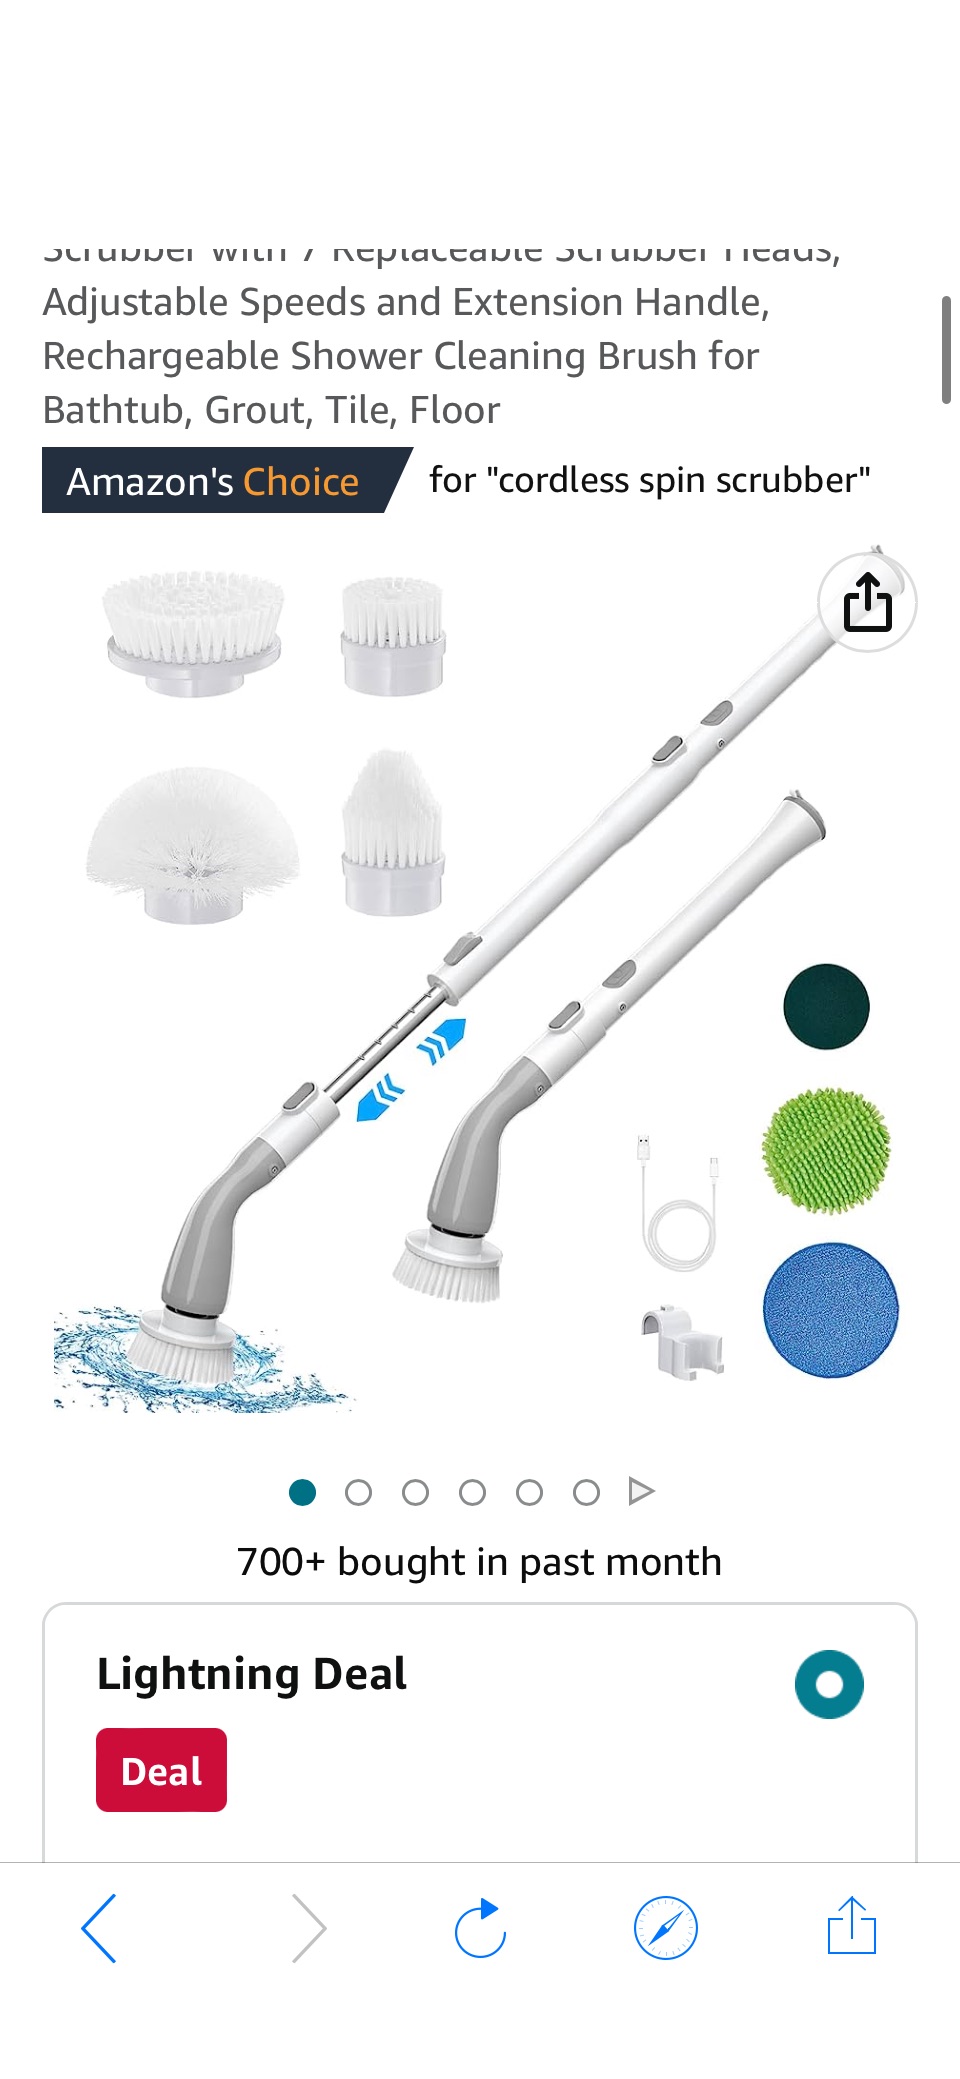 Amazon.com: Keimi Electric Spin Scrubber, 2023 New Cordless Scrubber with 7 Replaceable Scrubber Heads, Adjustable Speeds and Extension Handle, Rechargeable原价64.99